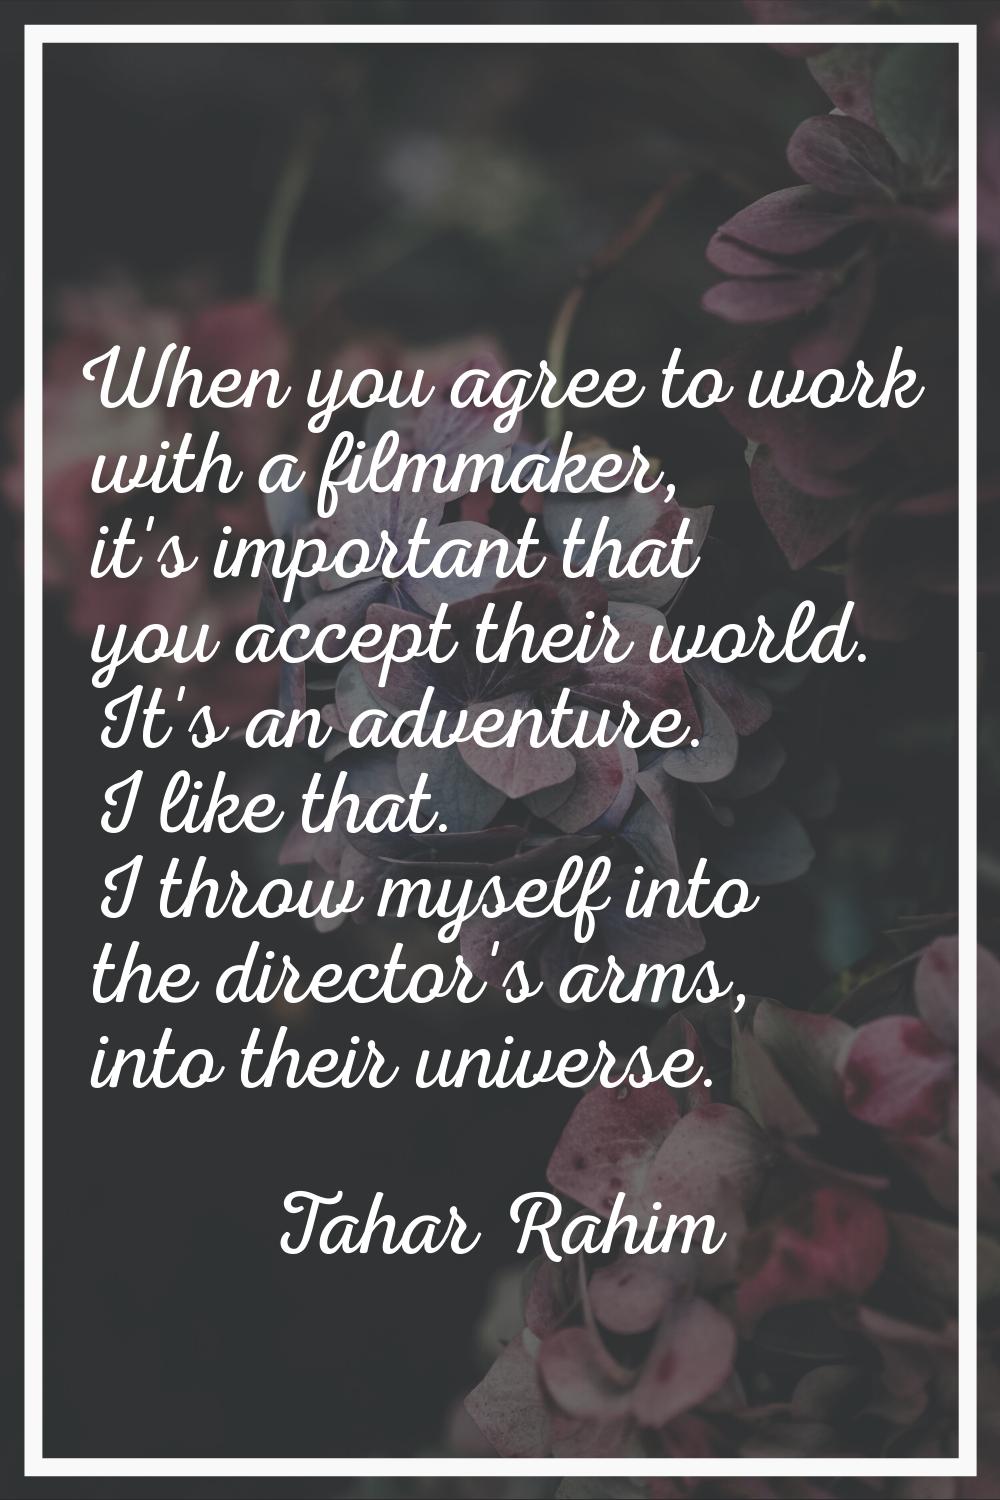 When you agree to work with a filmmaker, it's important that you accept their world. It's an advent